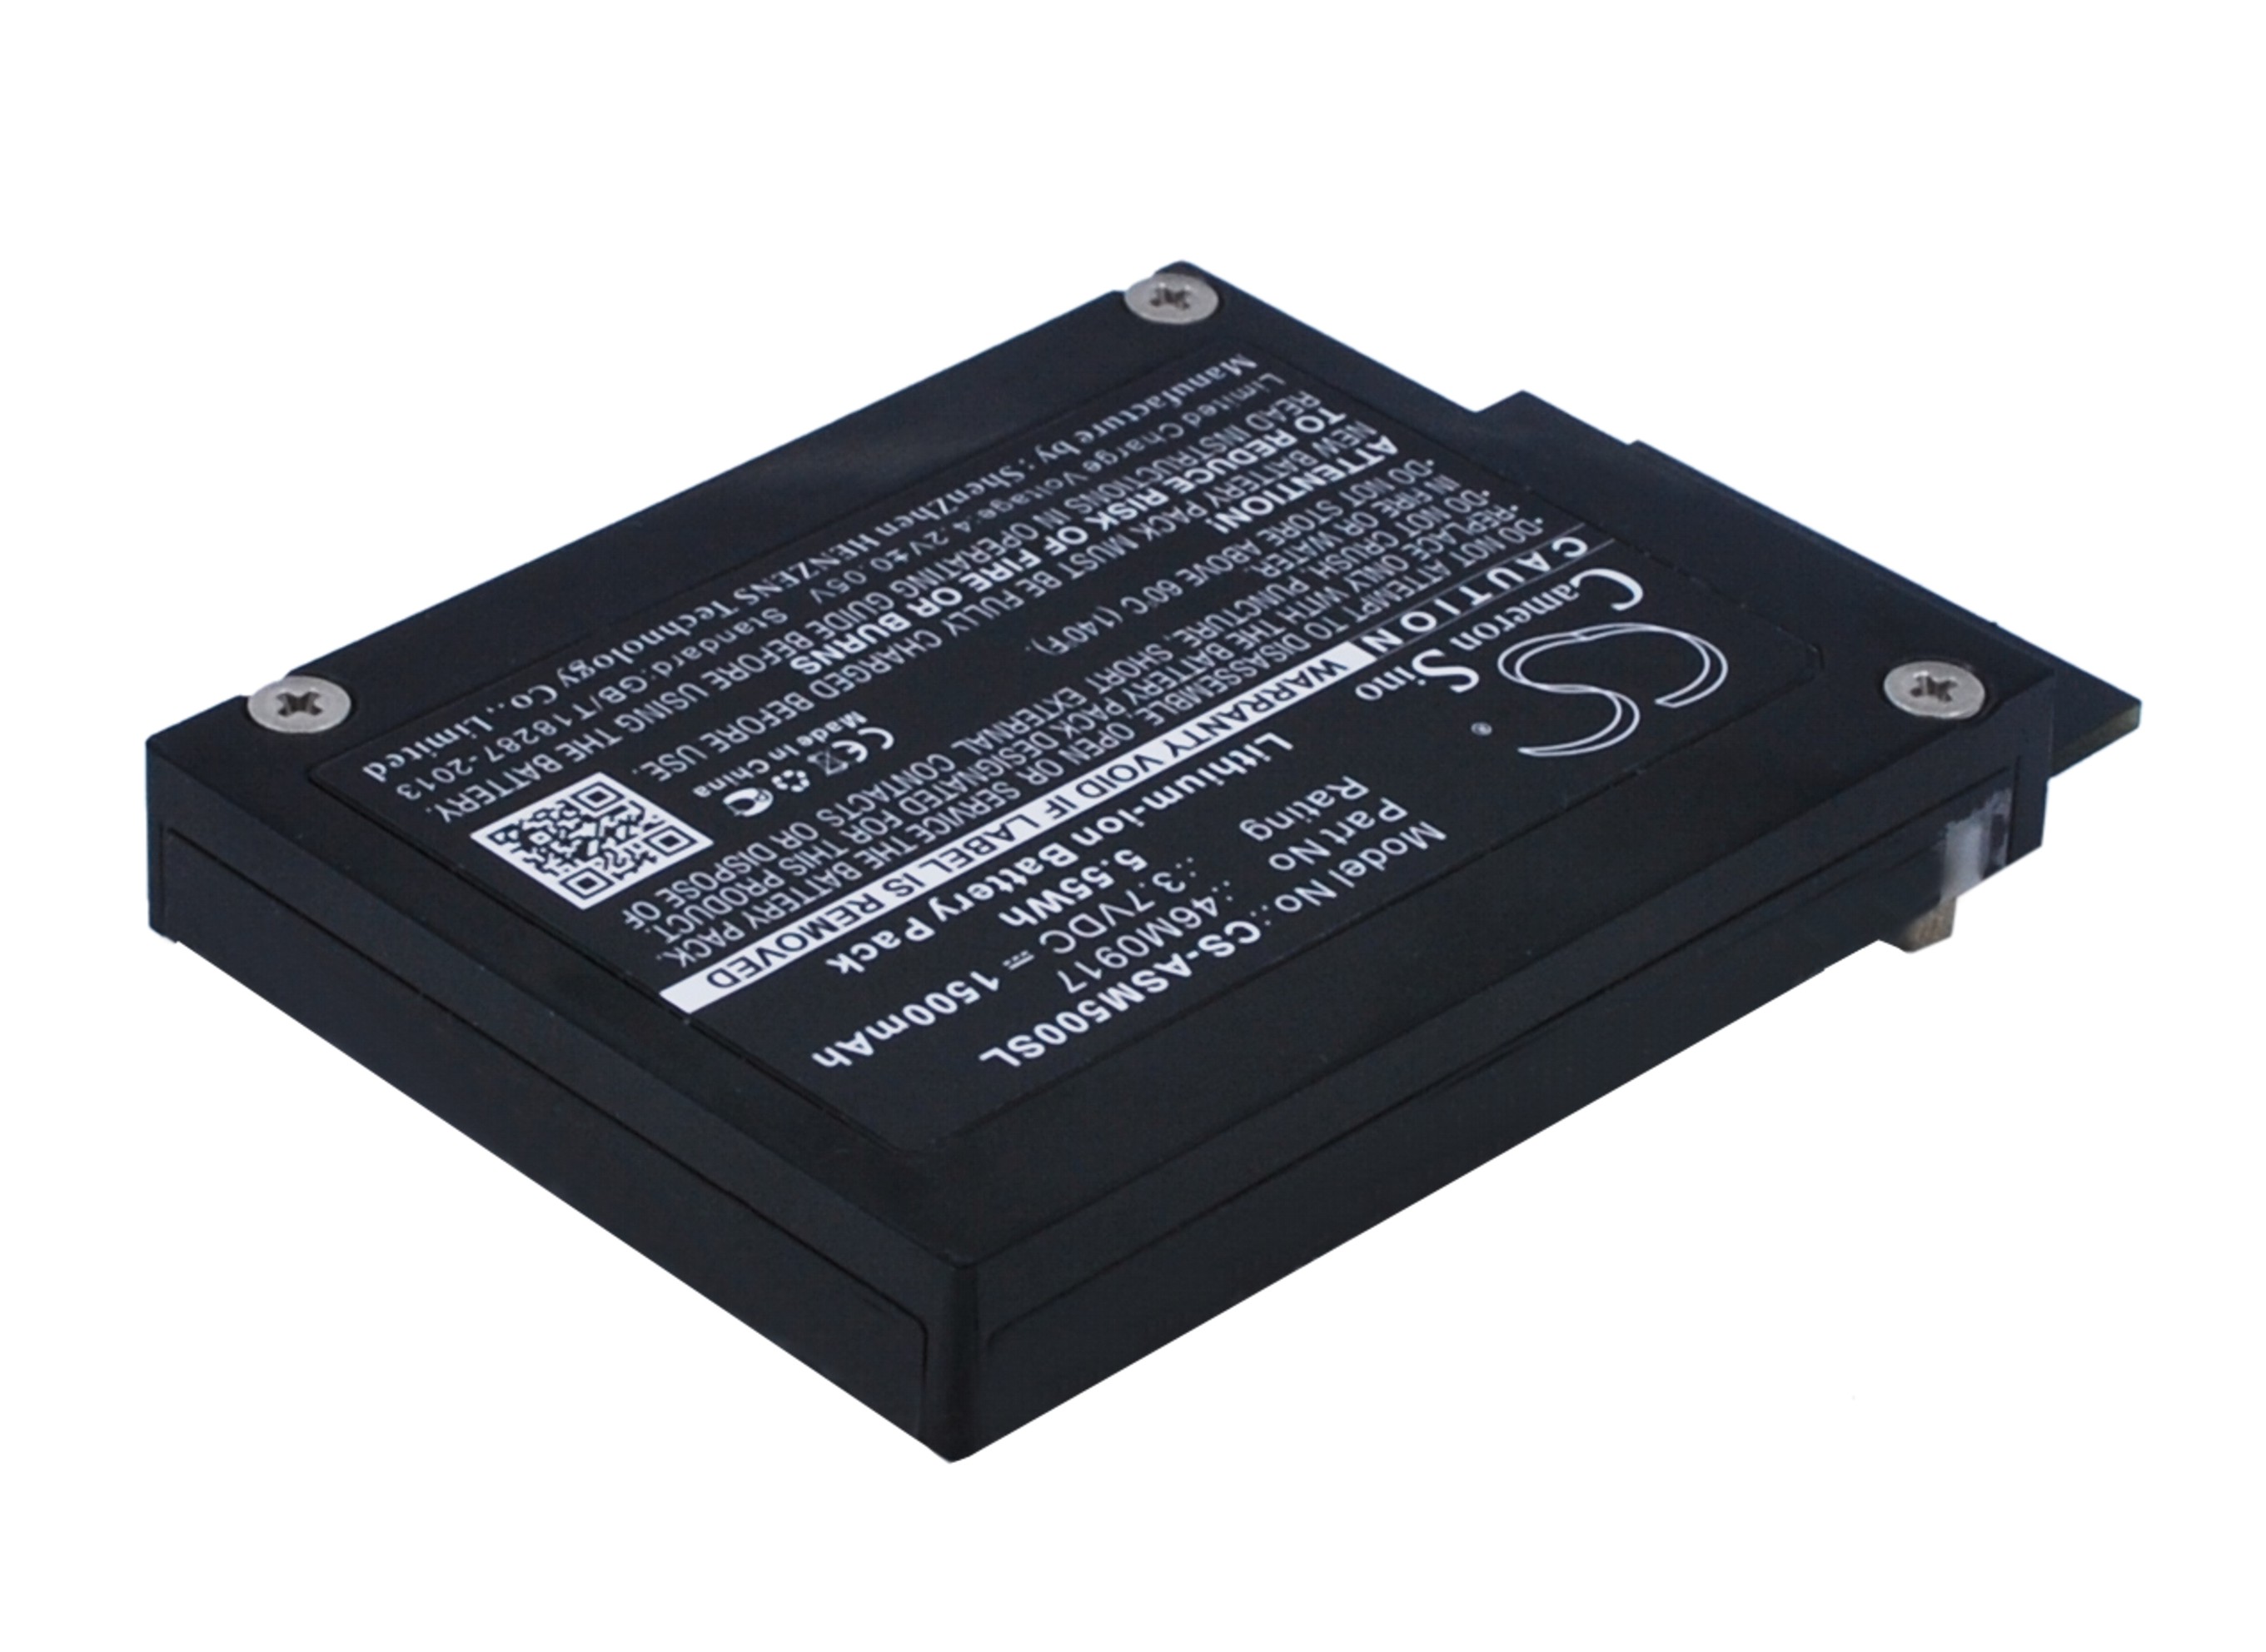 Battery for IBM LSI 3650M4 43W4342 81Y4508 81Y4559 81Y4491 81Y4579 BAT1S1P M5000 - image 2 of 4